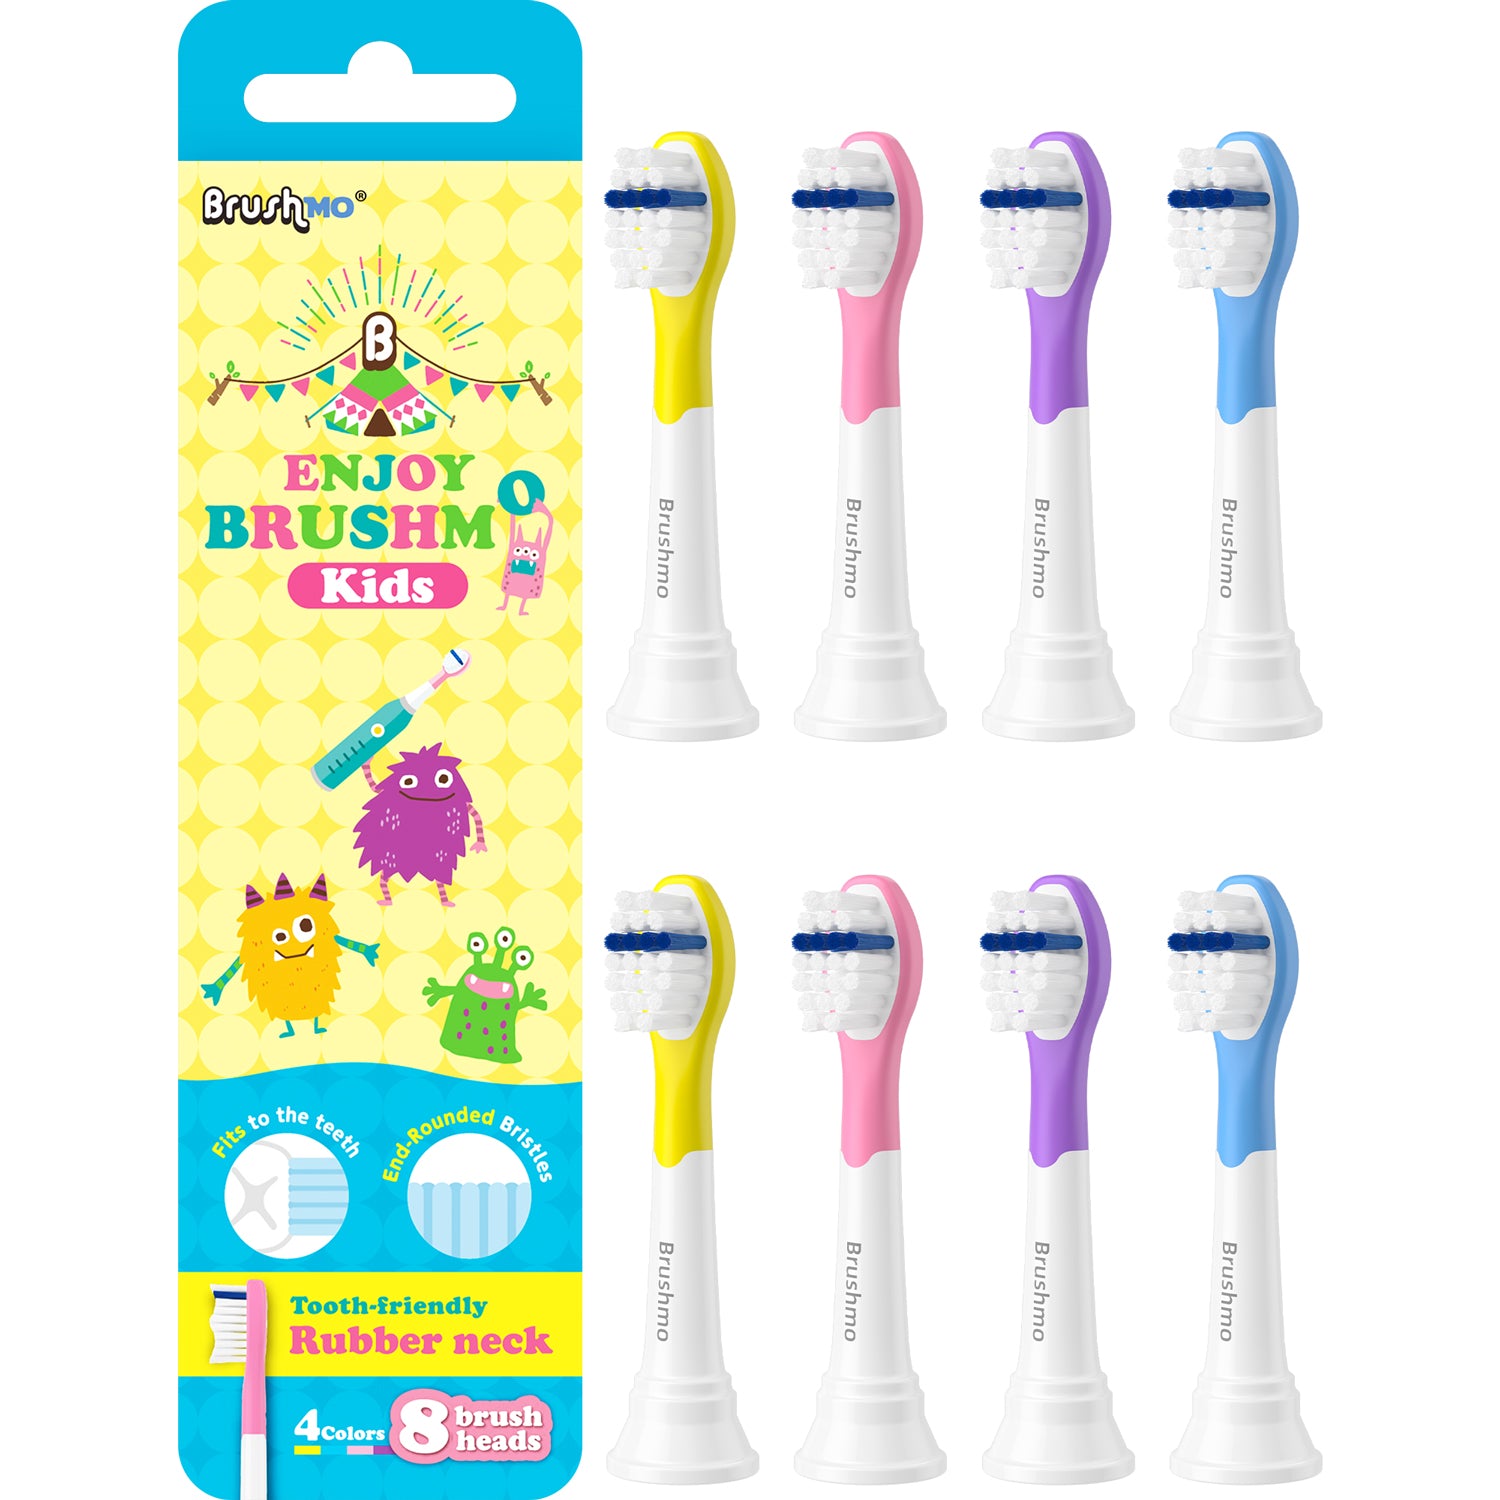 Replacement Toothbrush Heads Compatible for Sonicare for Kids HX6033, 8 Pack Compact